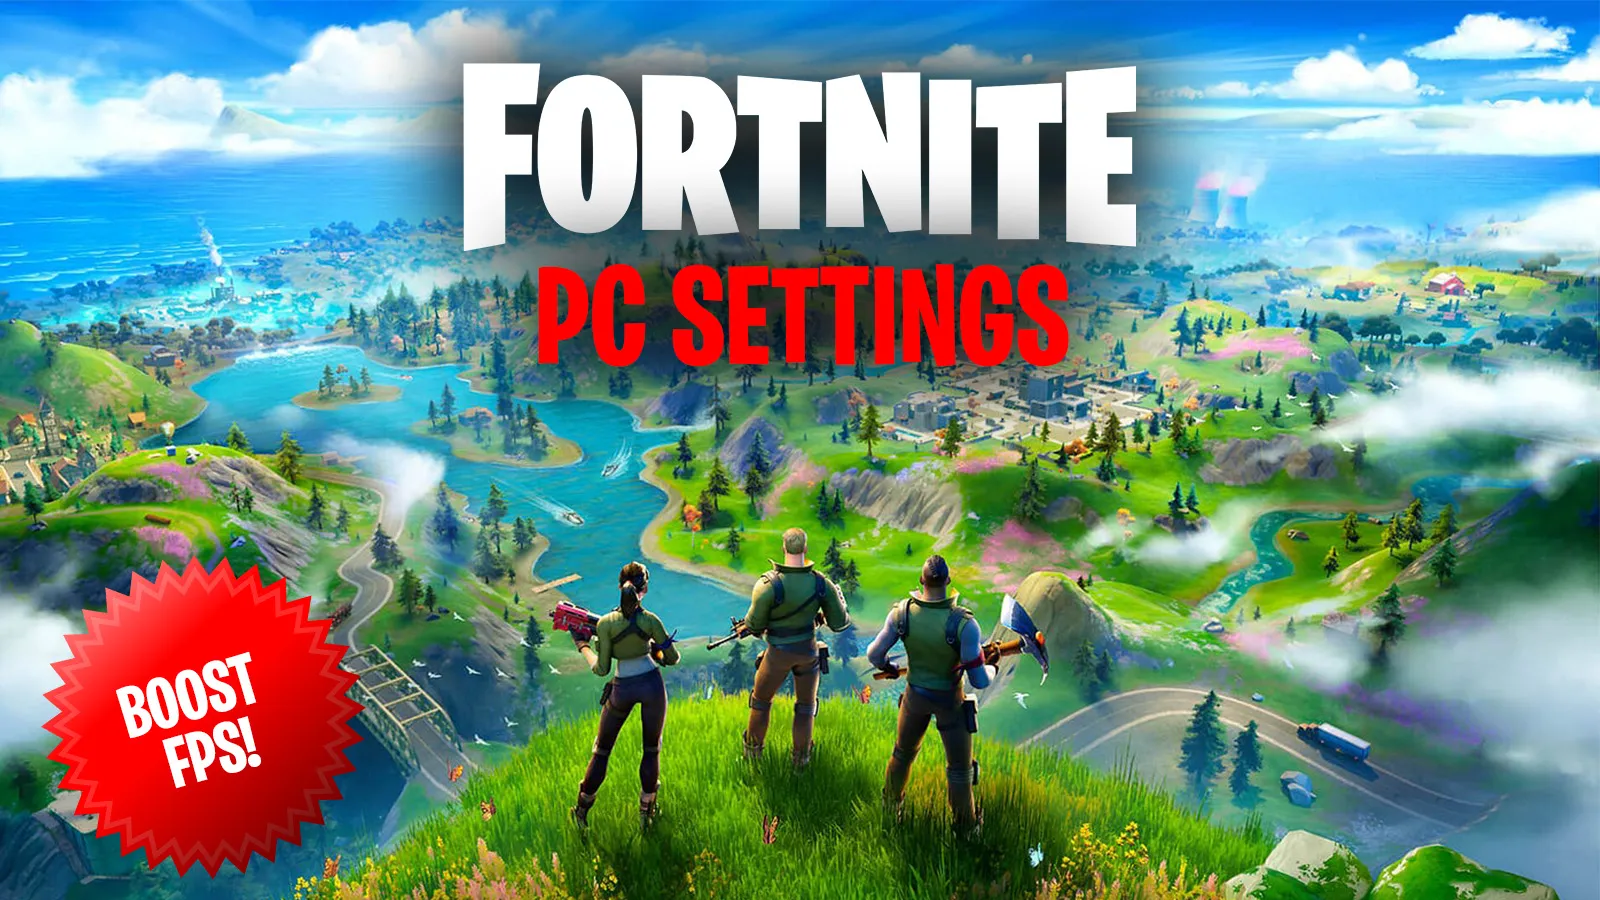 Pro Valorant settings guide for the best performance: Maximize your FPS -  Dexerto